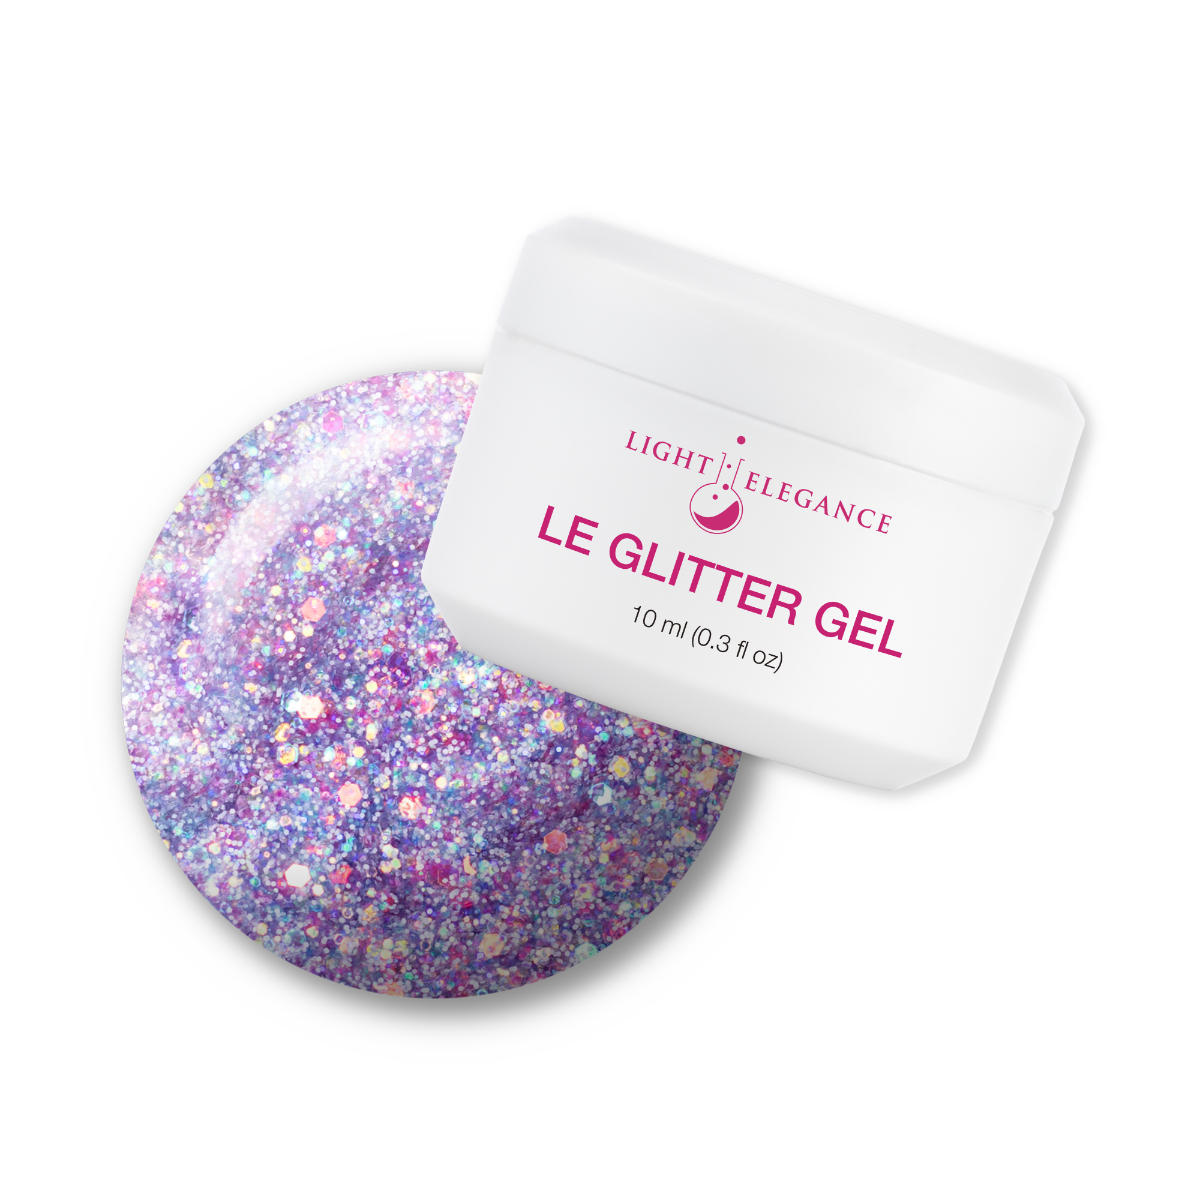 Light Elegance Glitter Gel - In My Happy Place :: New Packaging - Creata Beauty - Professional Beauty Products